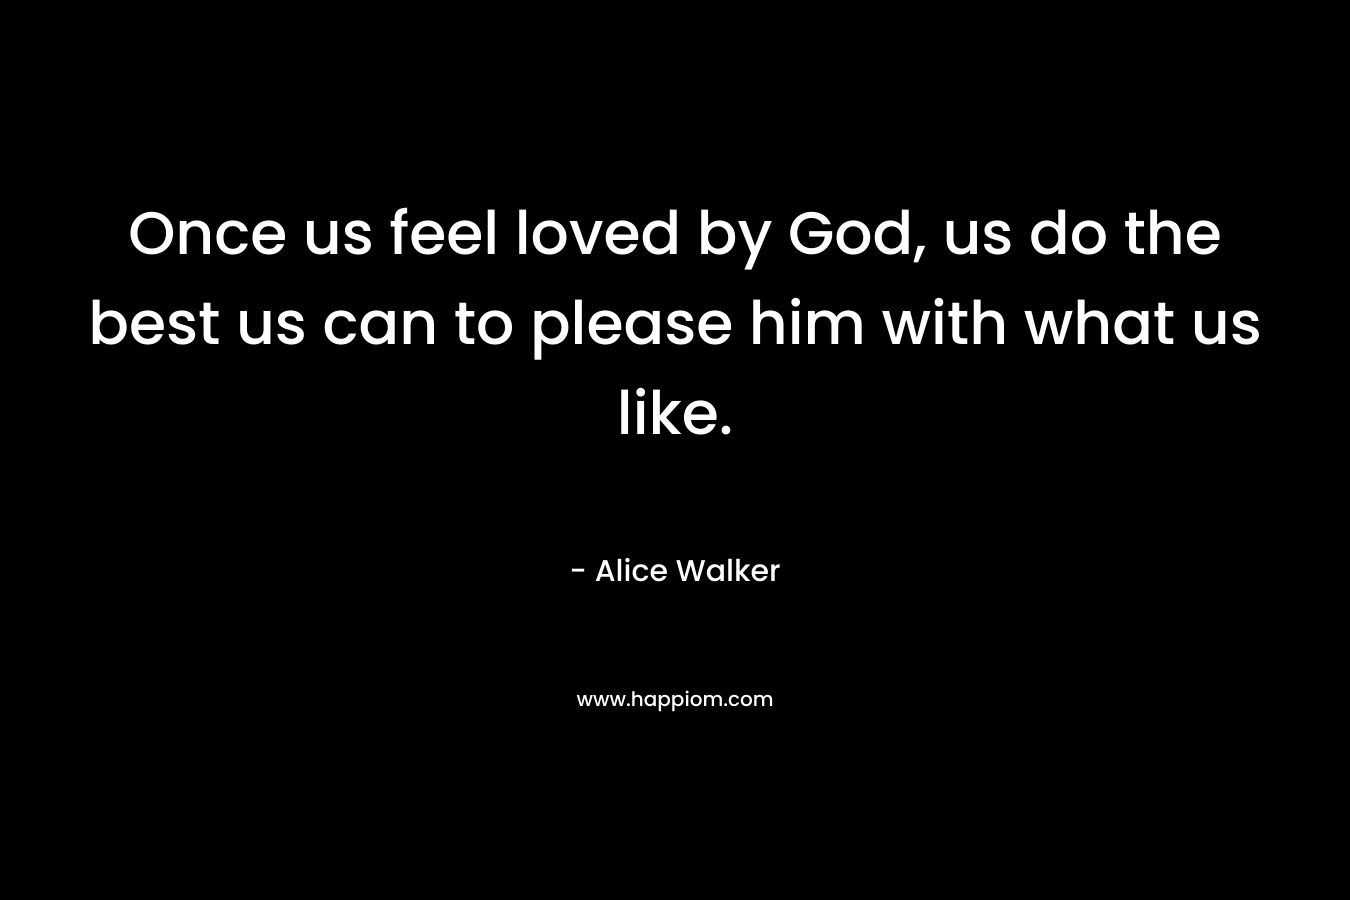 Once us feel loved by God, us do the best us can to please him with what us like.